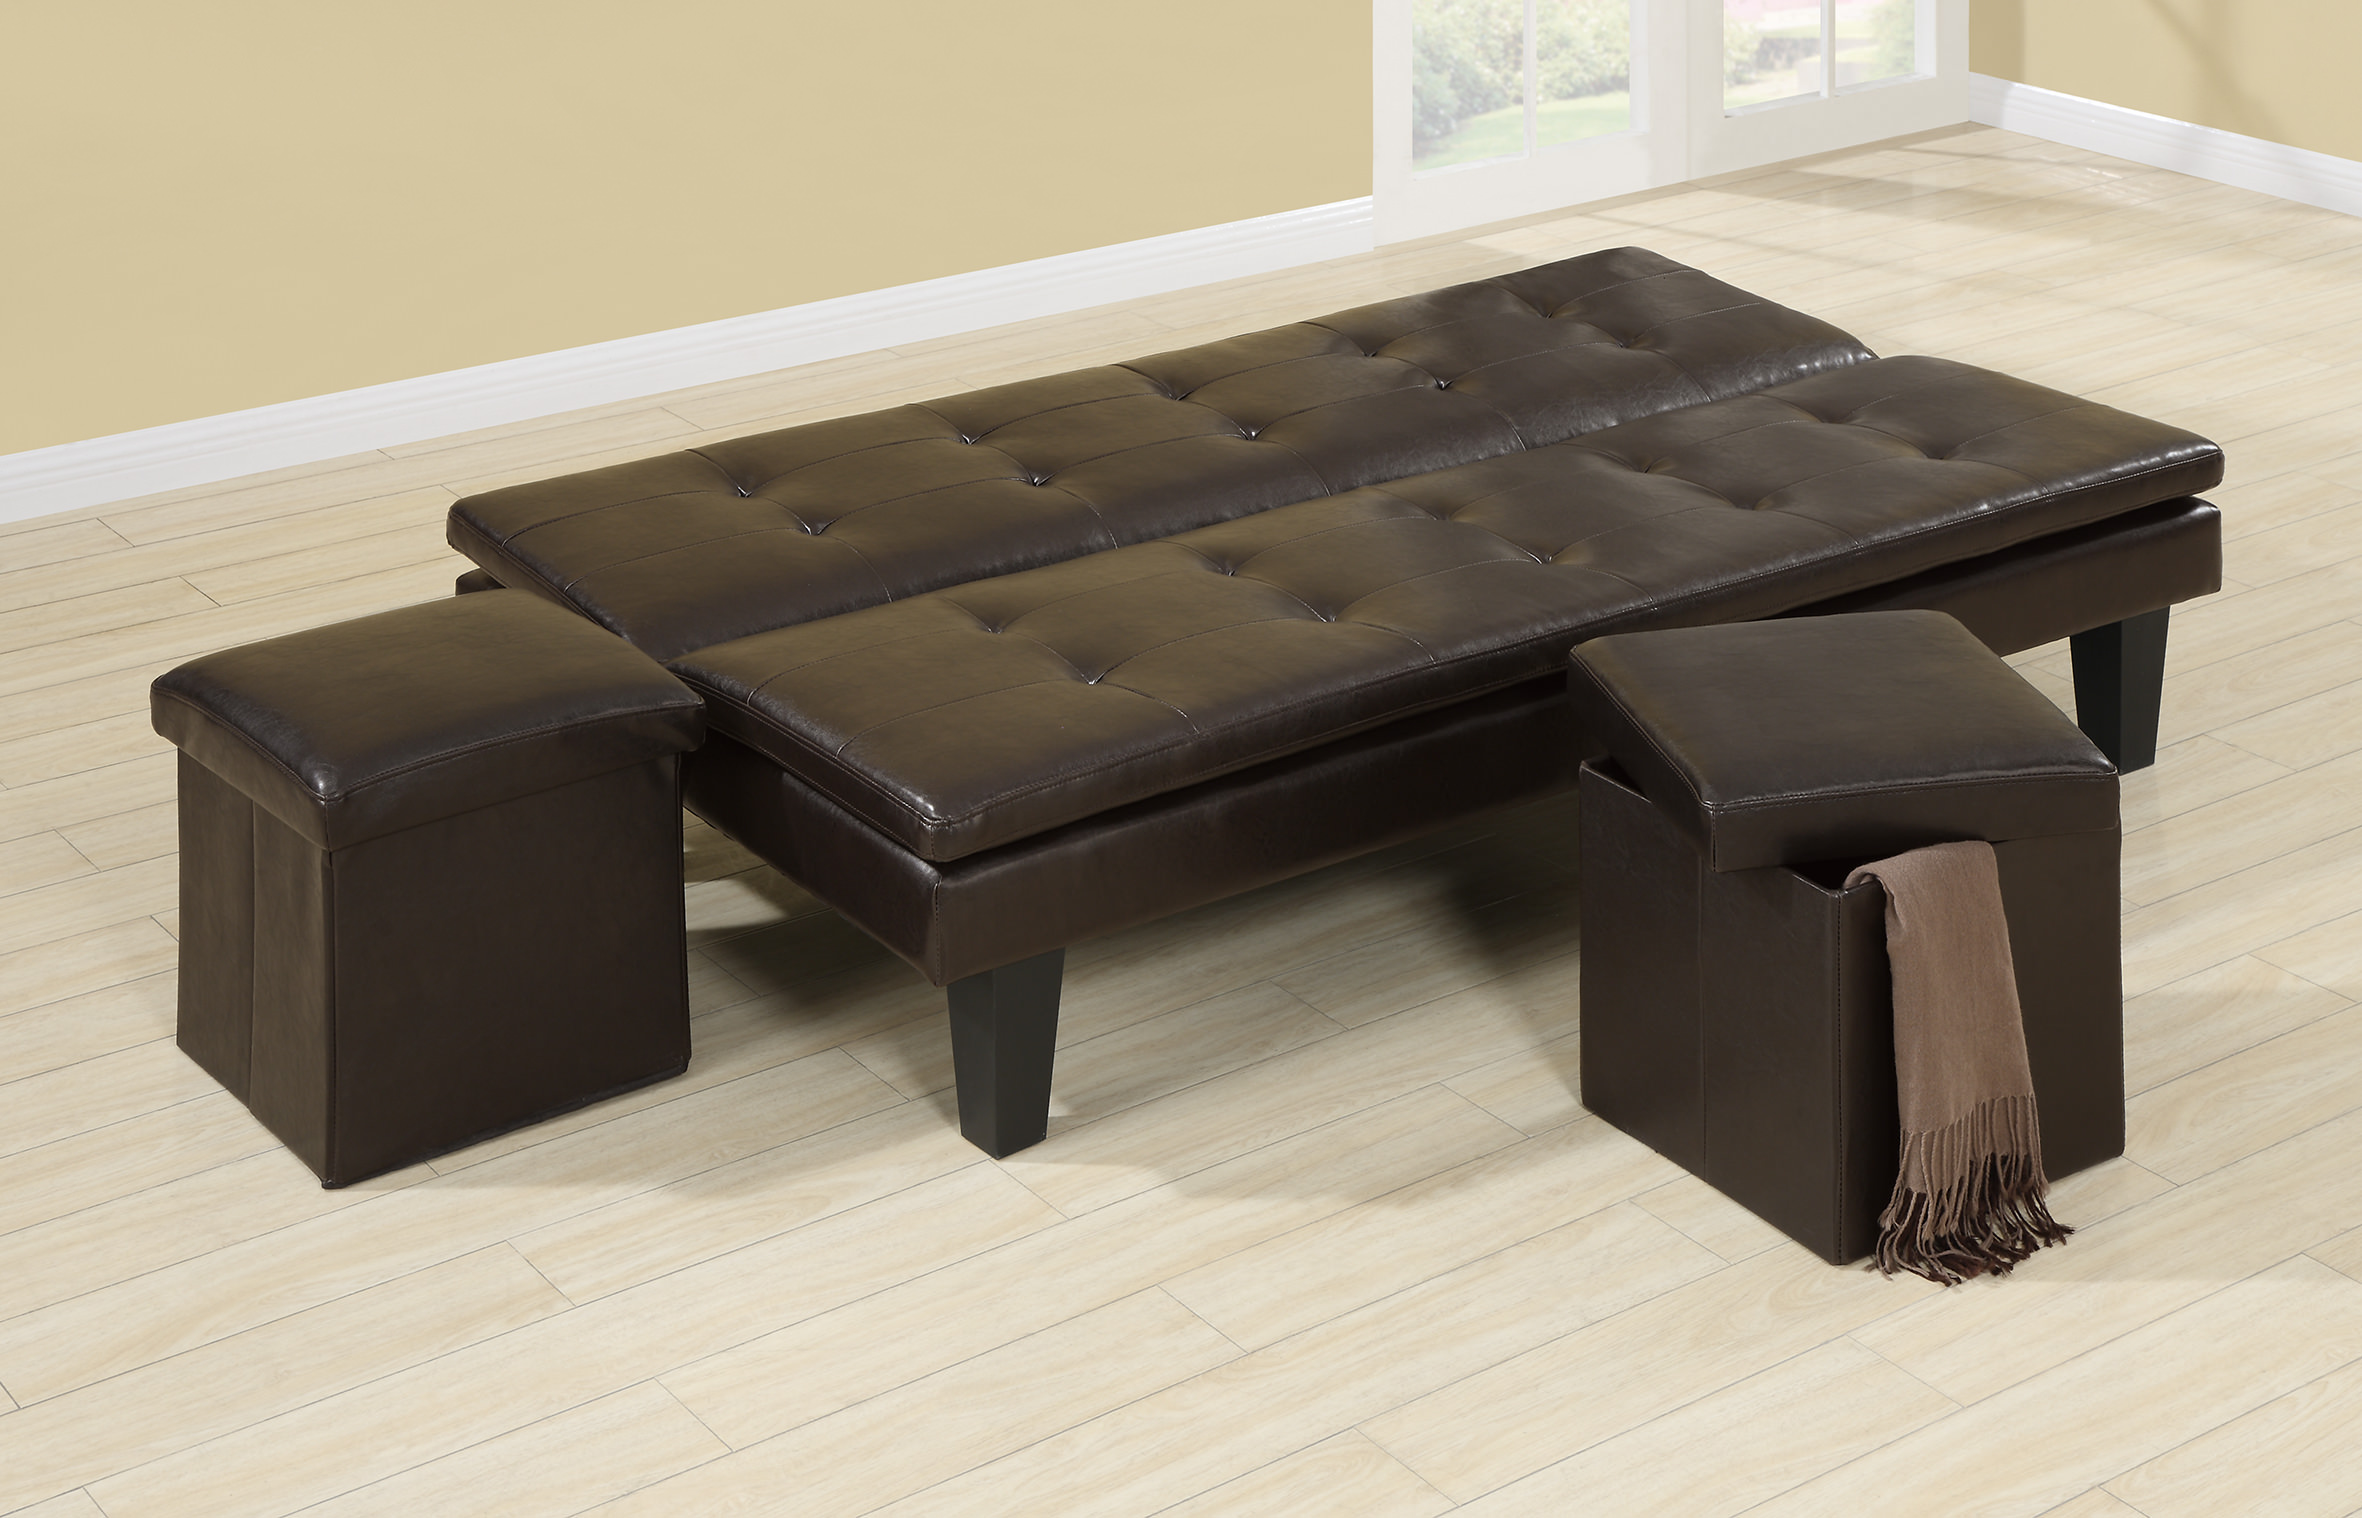 F7199 Espresso Convertible Sofa Bed with 2 Pcs Ottoman by Poundex